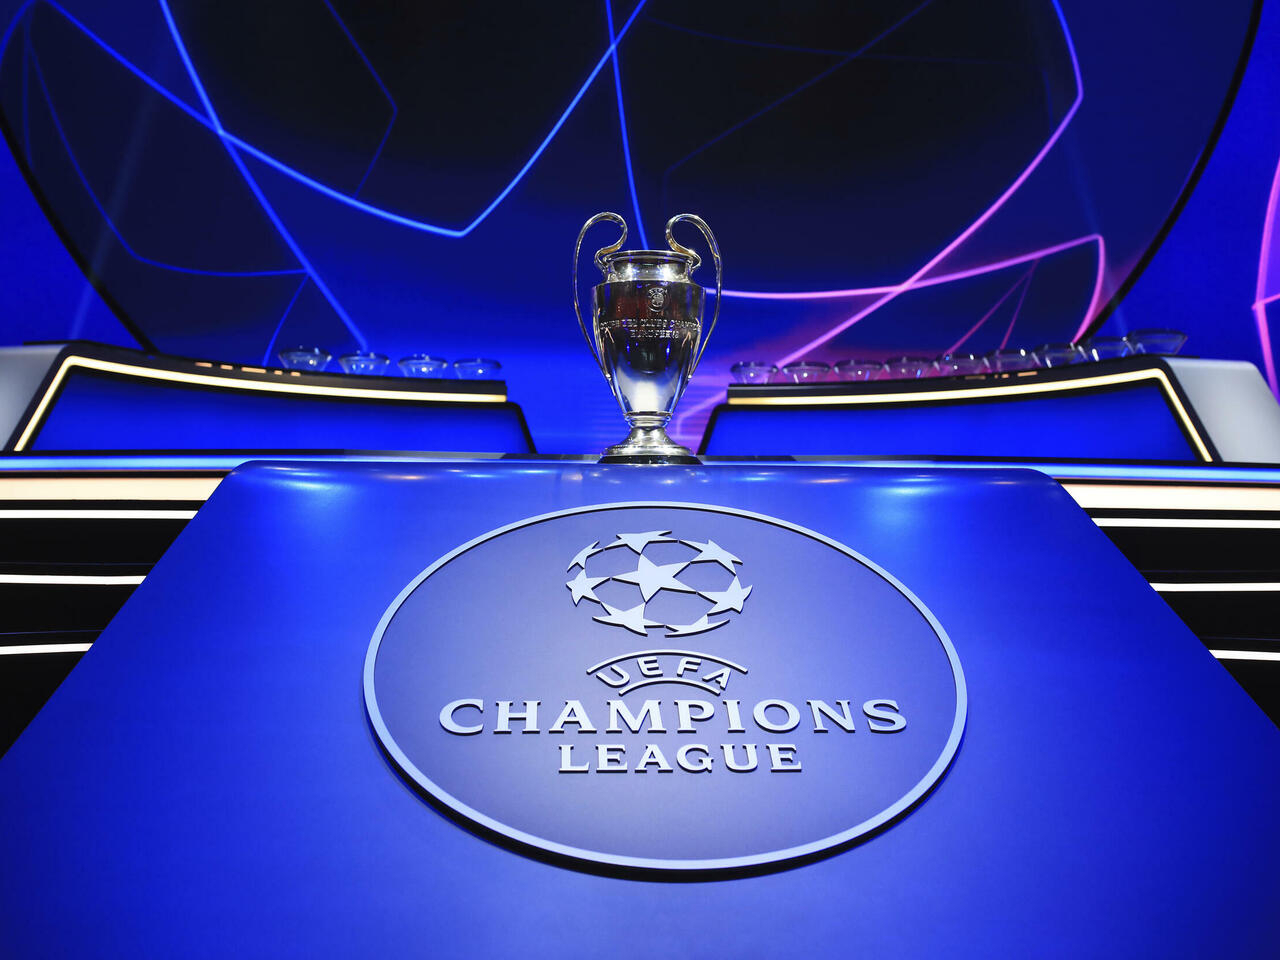 Winner Odds for the Champions League 2022-23